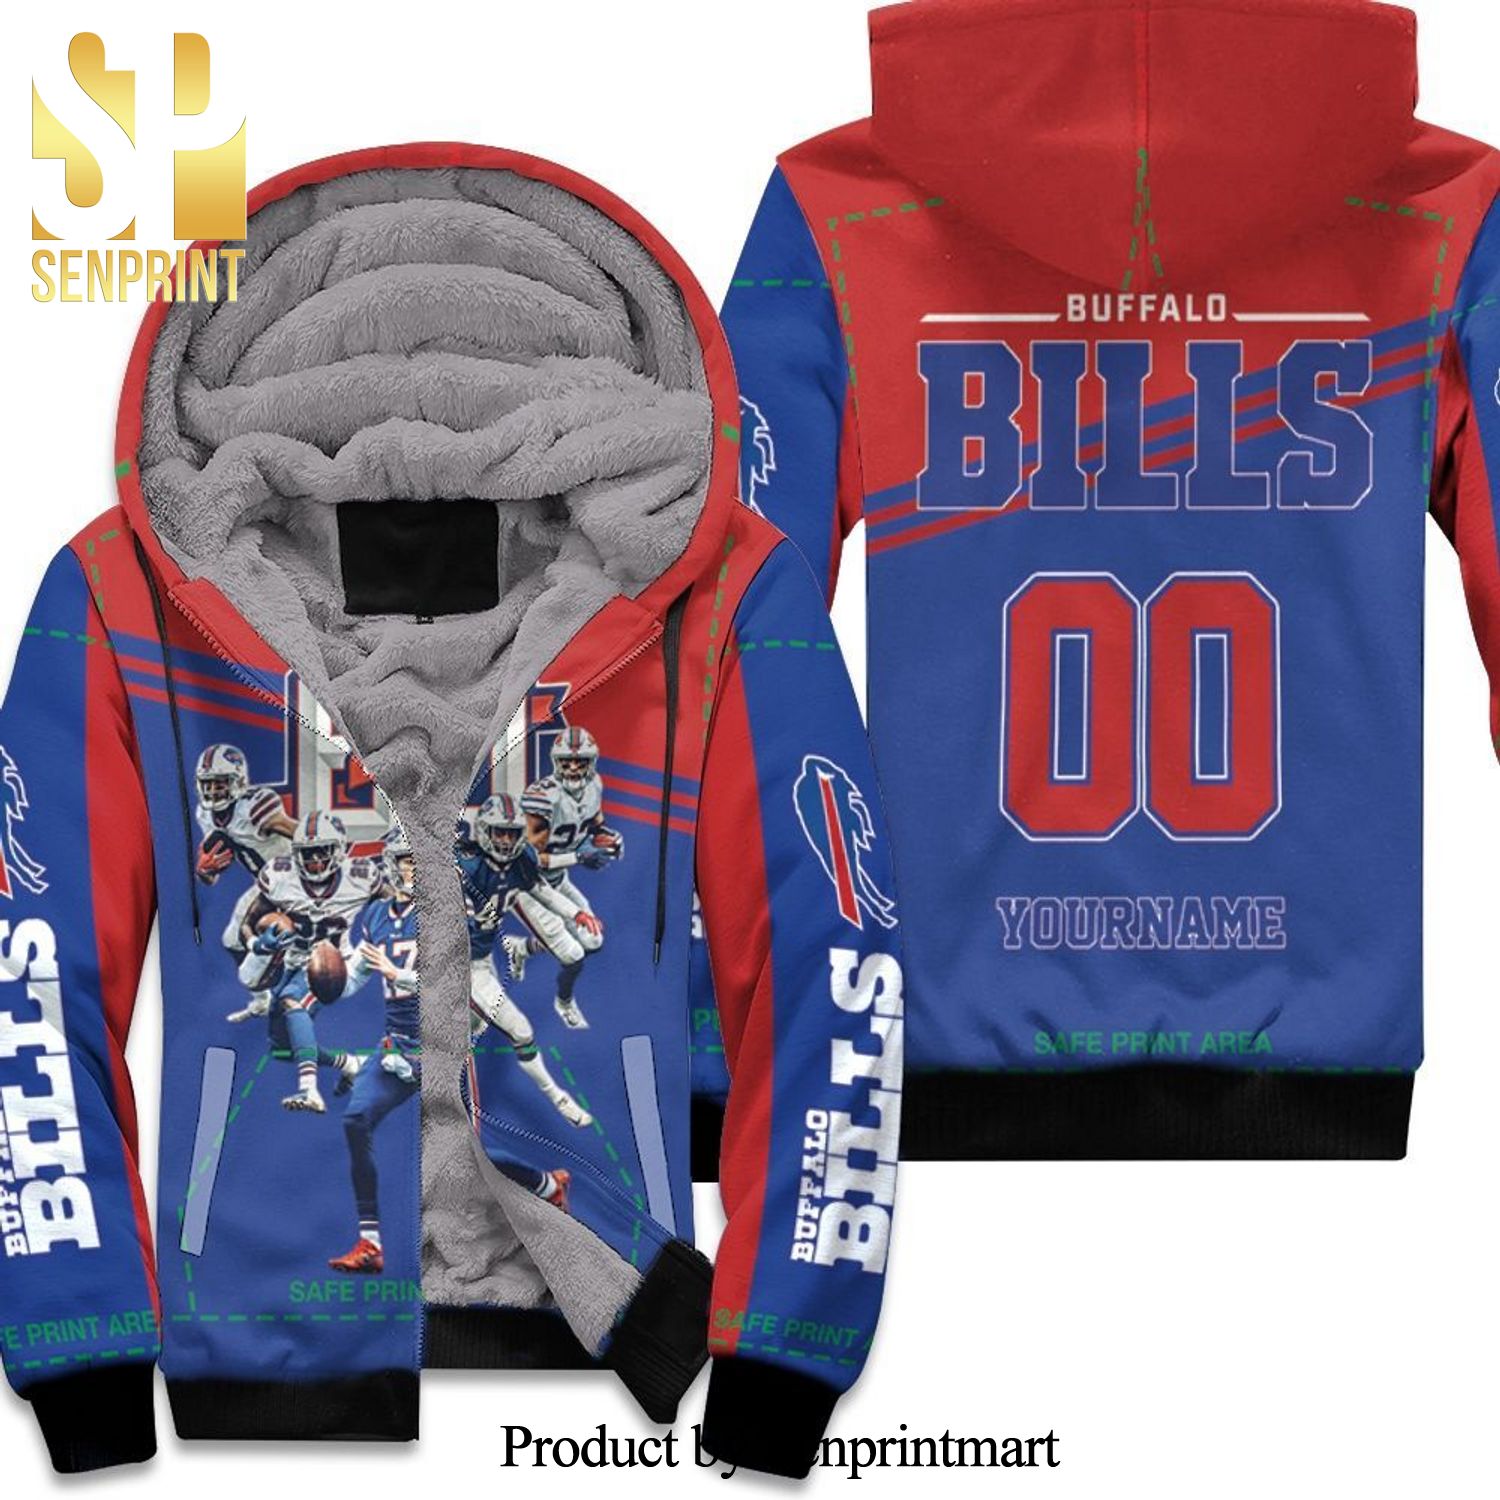 Buffalo Bills 60th Anniversary 2020 Afc East Division Champs Personalized Awesome Outfit Unisex Fleece Hoodie